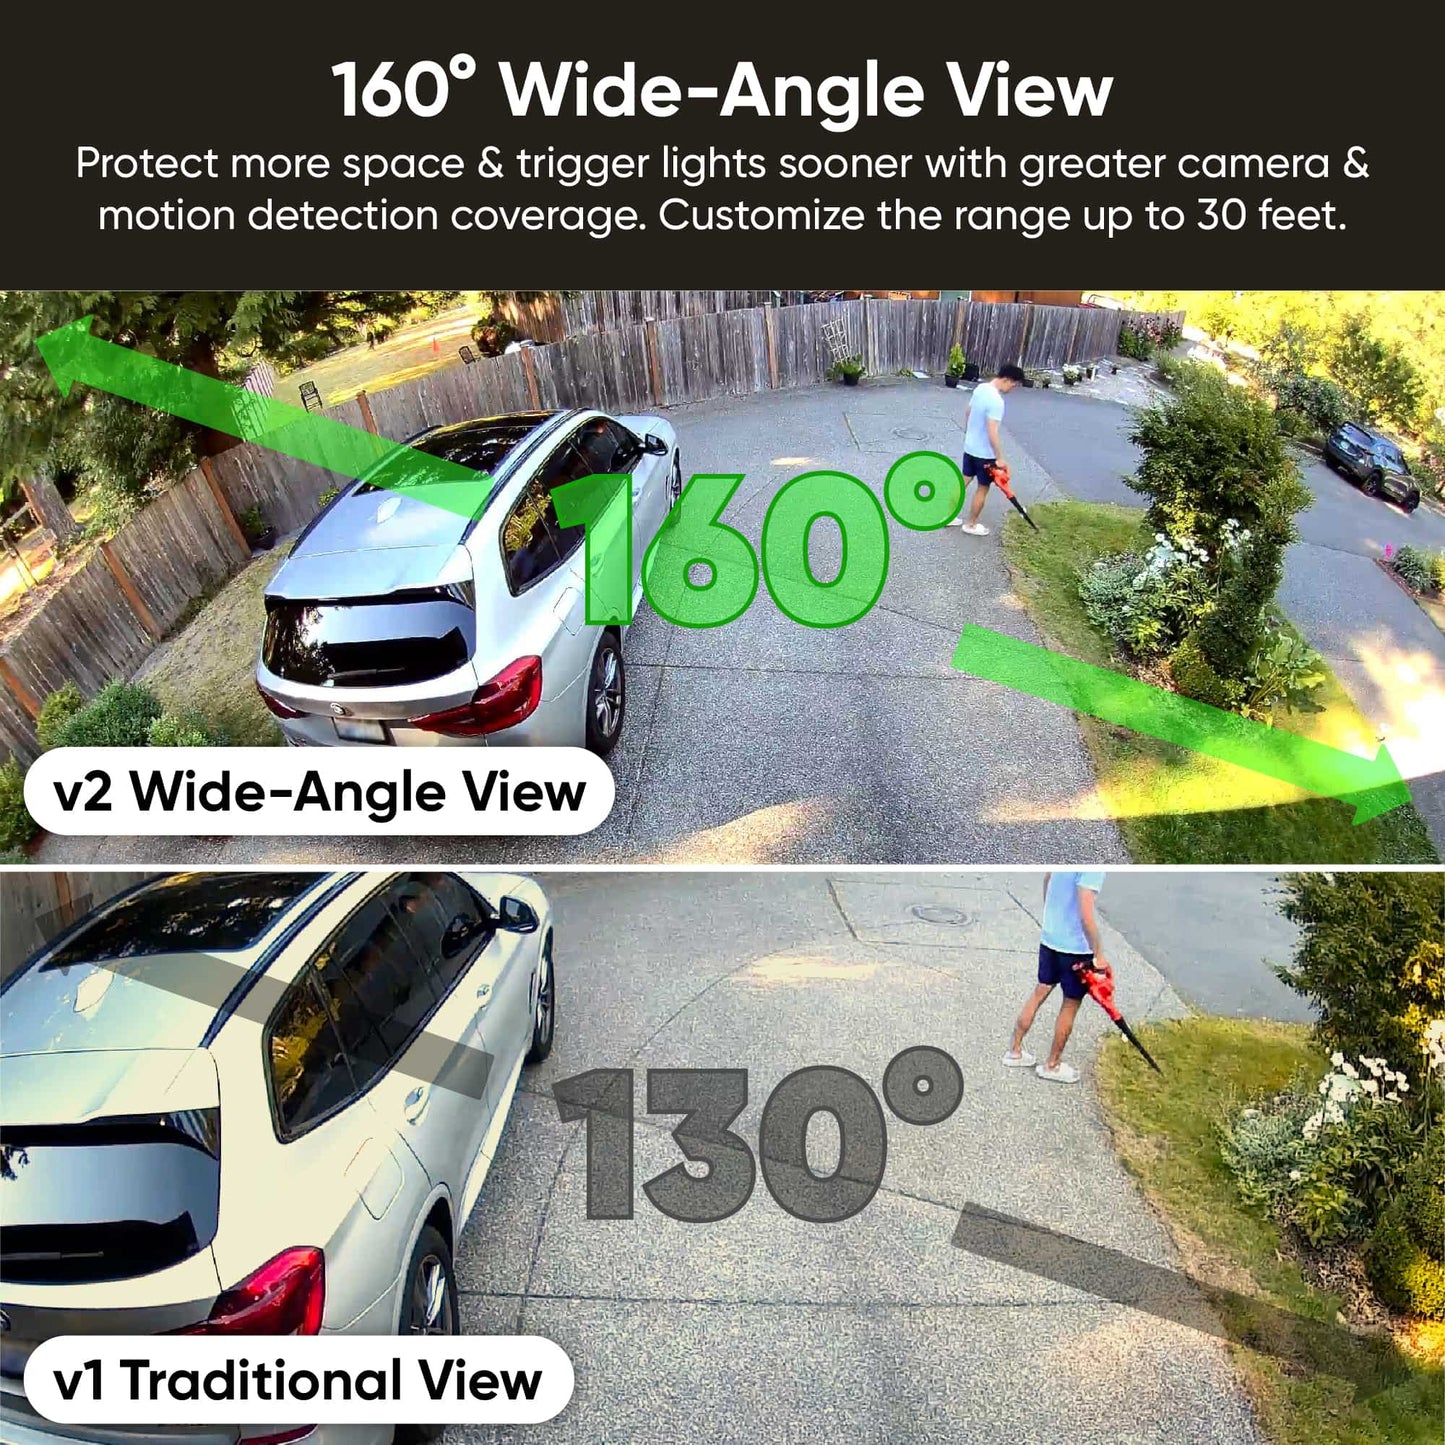 160° super-wide view comparison with a traditional view